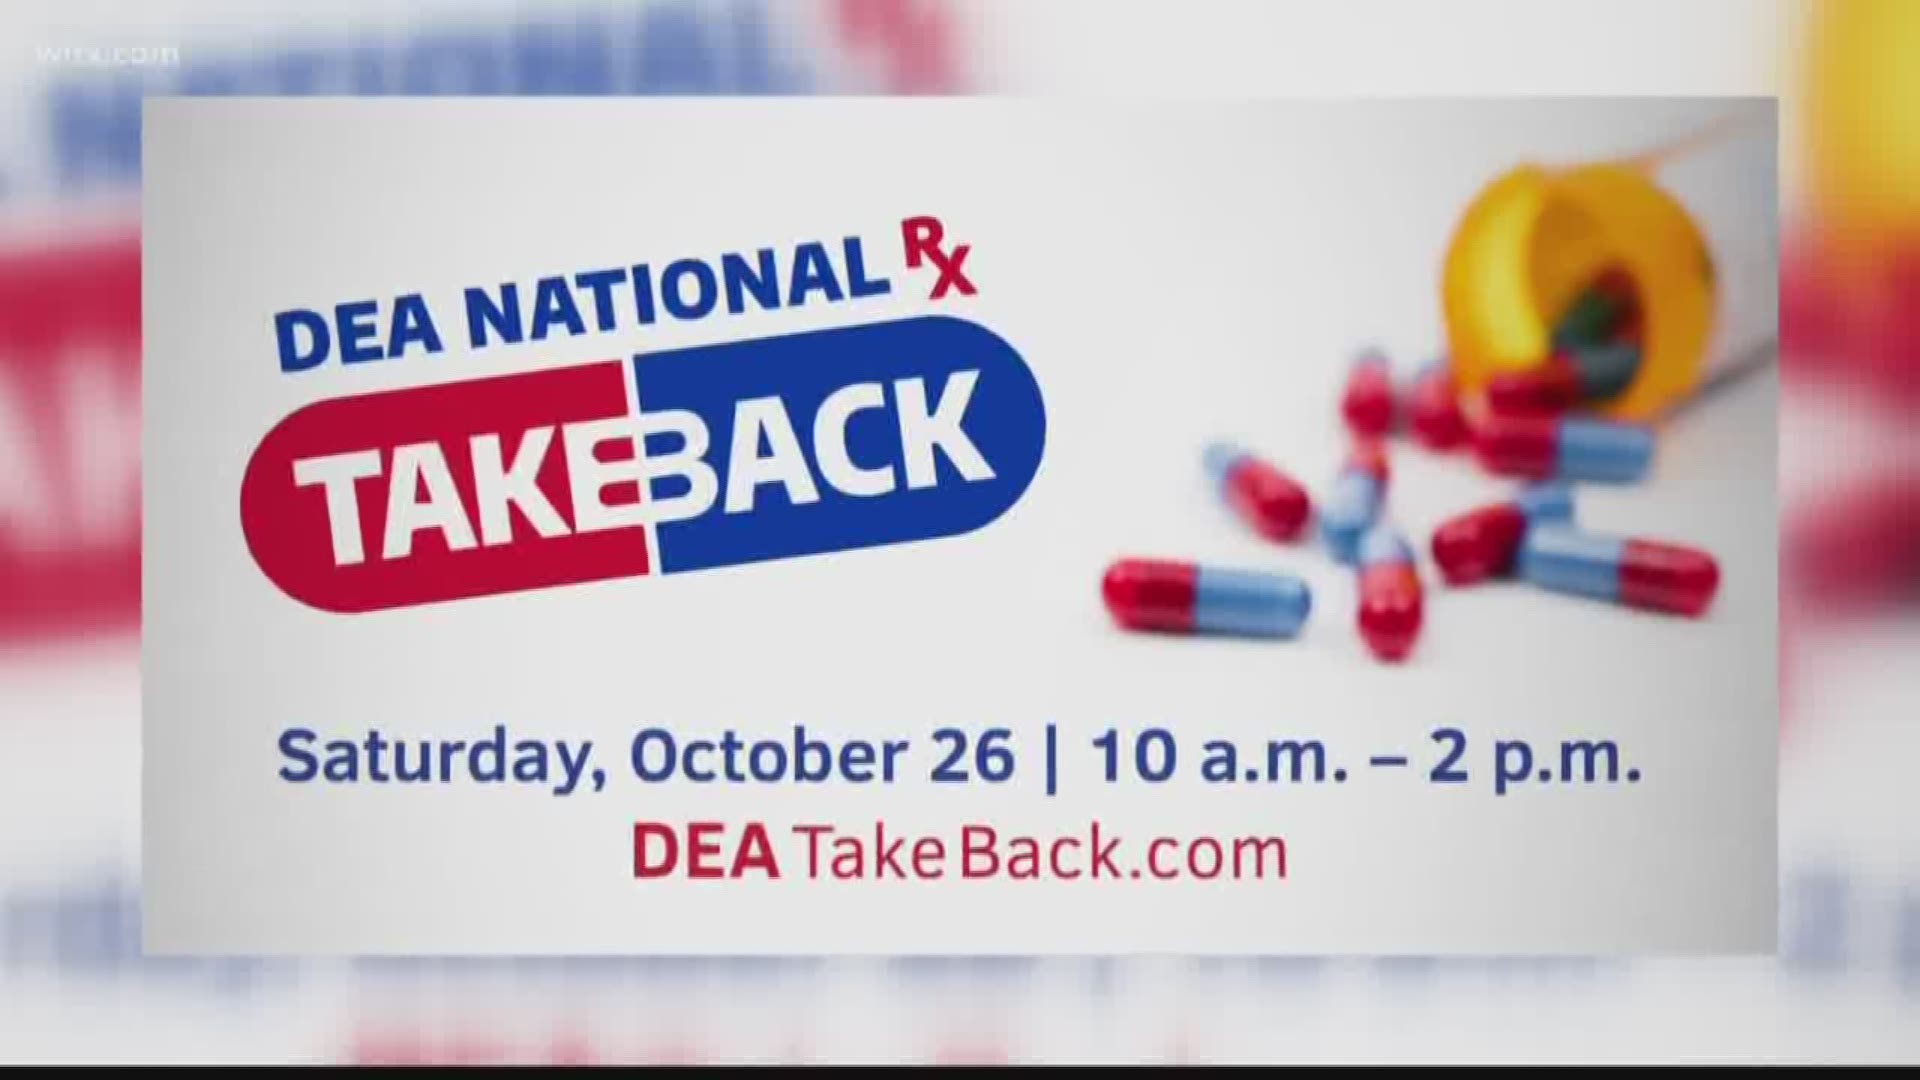 The Irmo Police Department is taking part in the National Drug Take-back day on Saturday.